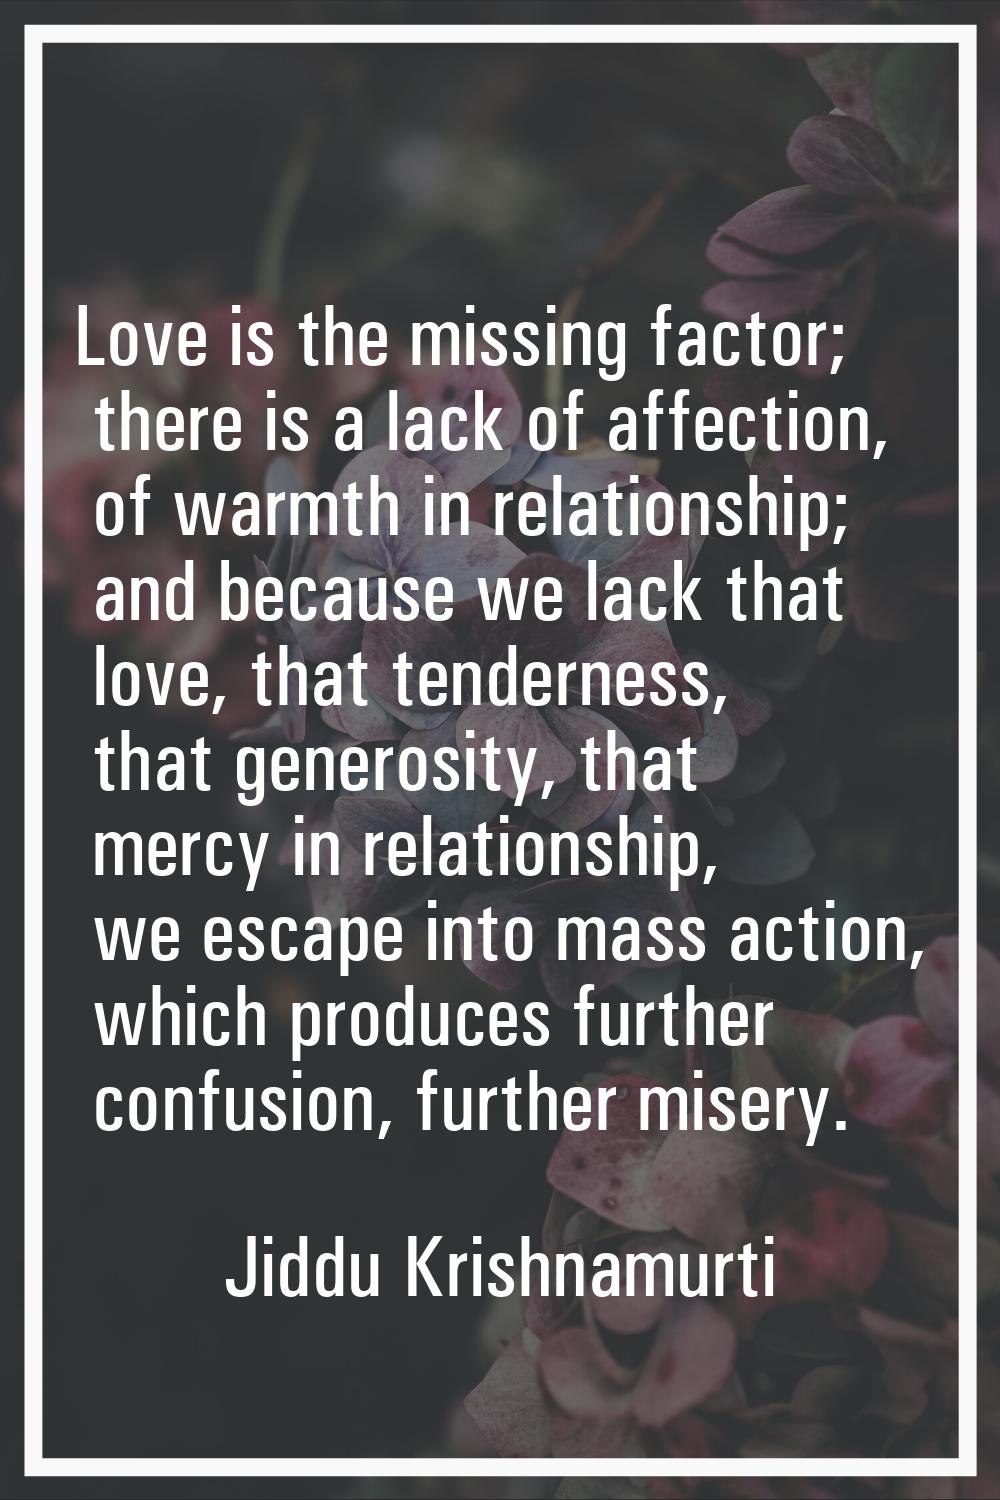 Love is the missing factor; there is a lack of affection, of warmth in relationship; and because we